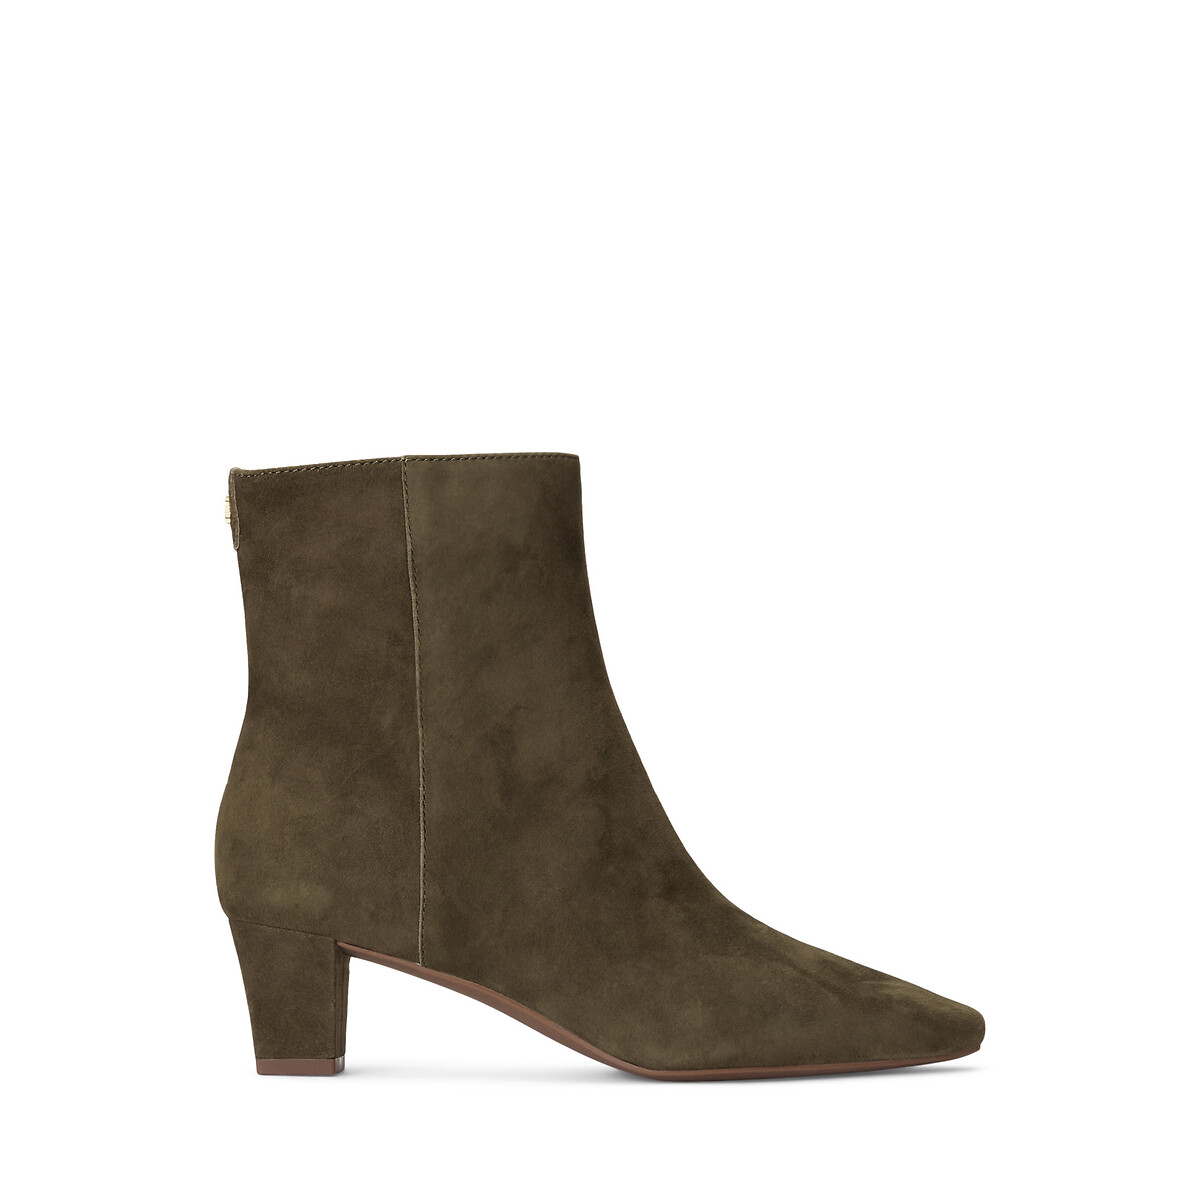 Willa Suede Ankle Boots with Pointed Toe, Zip Fastening and Block Heel